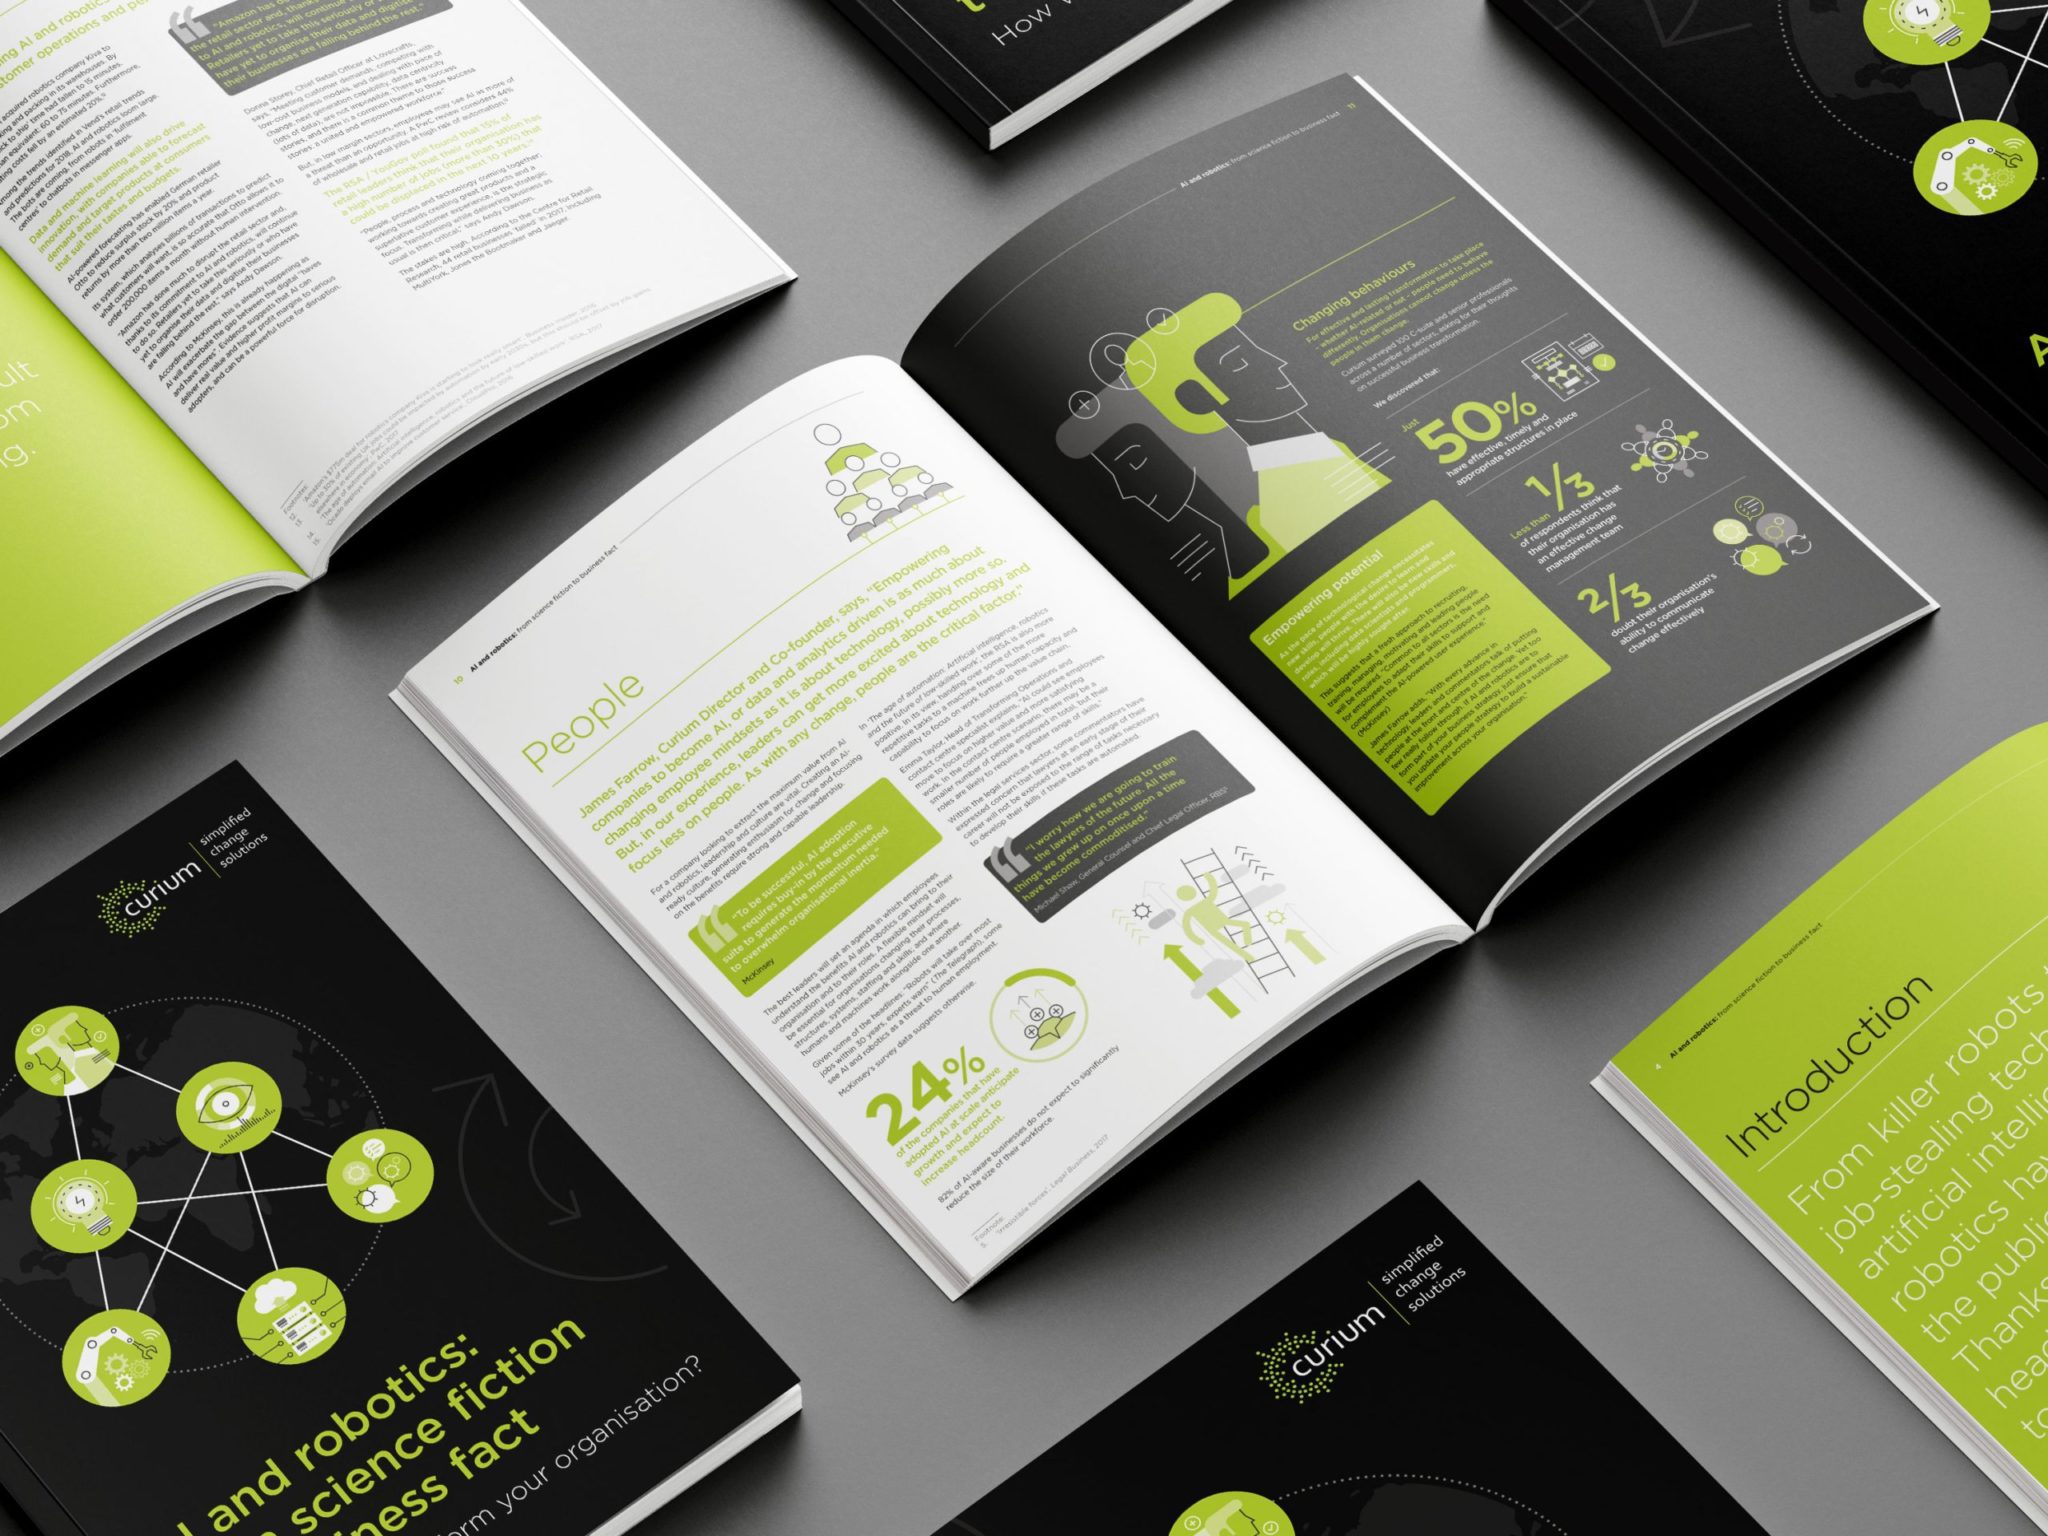 An apple green, white, and black themed visual report design in a brochure.